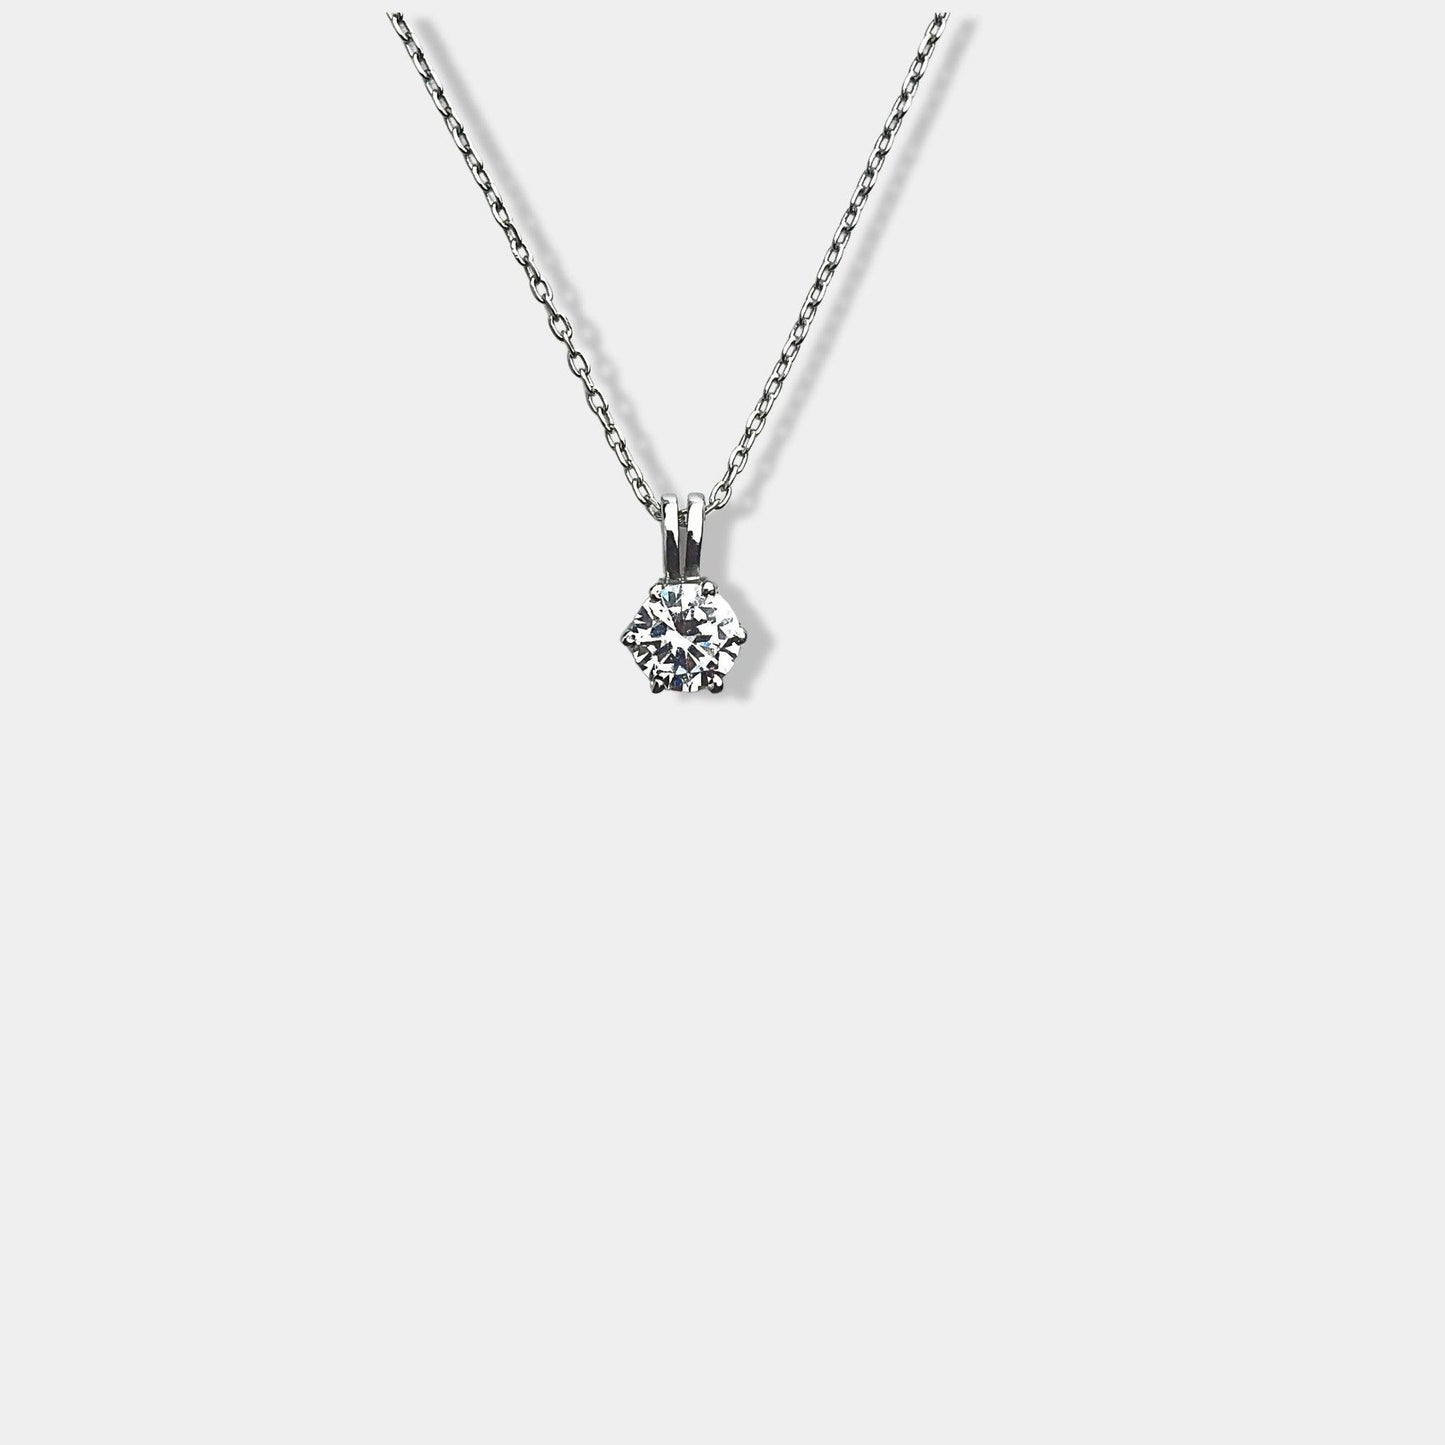 Enhance your style with a dazzling pendant on a chic sterling silver necklace. 2. Elevate your fashion game with a stunning pendant and a stylish sterling silver necklace. 3. Add a touch of elegance to your outfit with a shimmering pendant on a sleek sterling silver necklace.